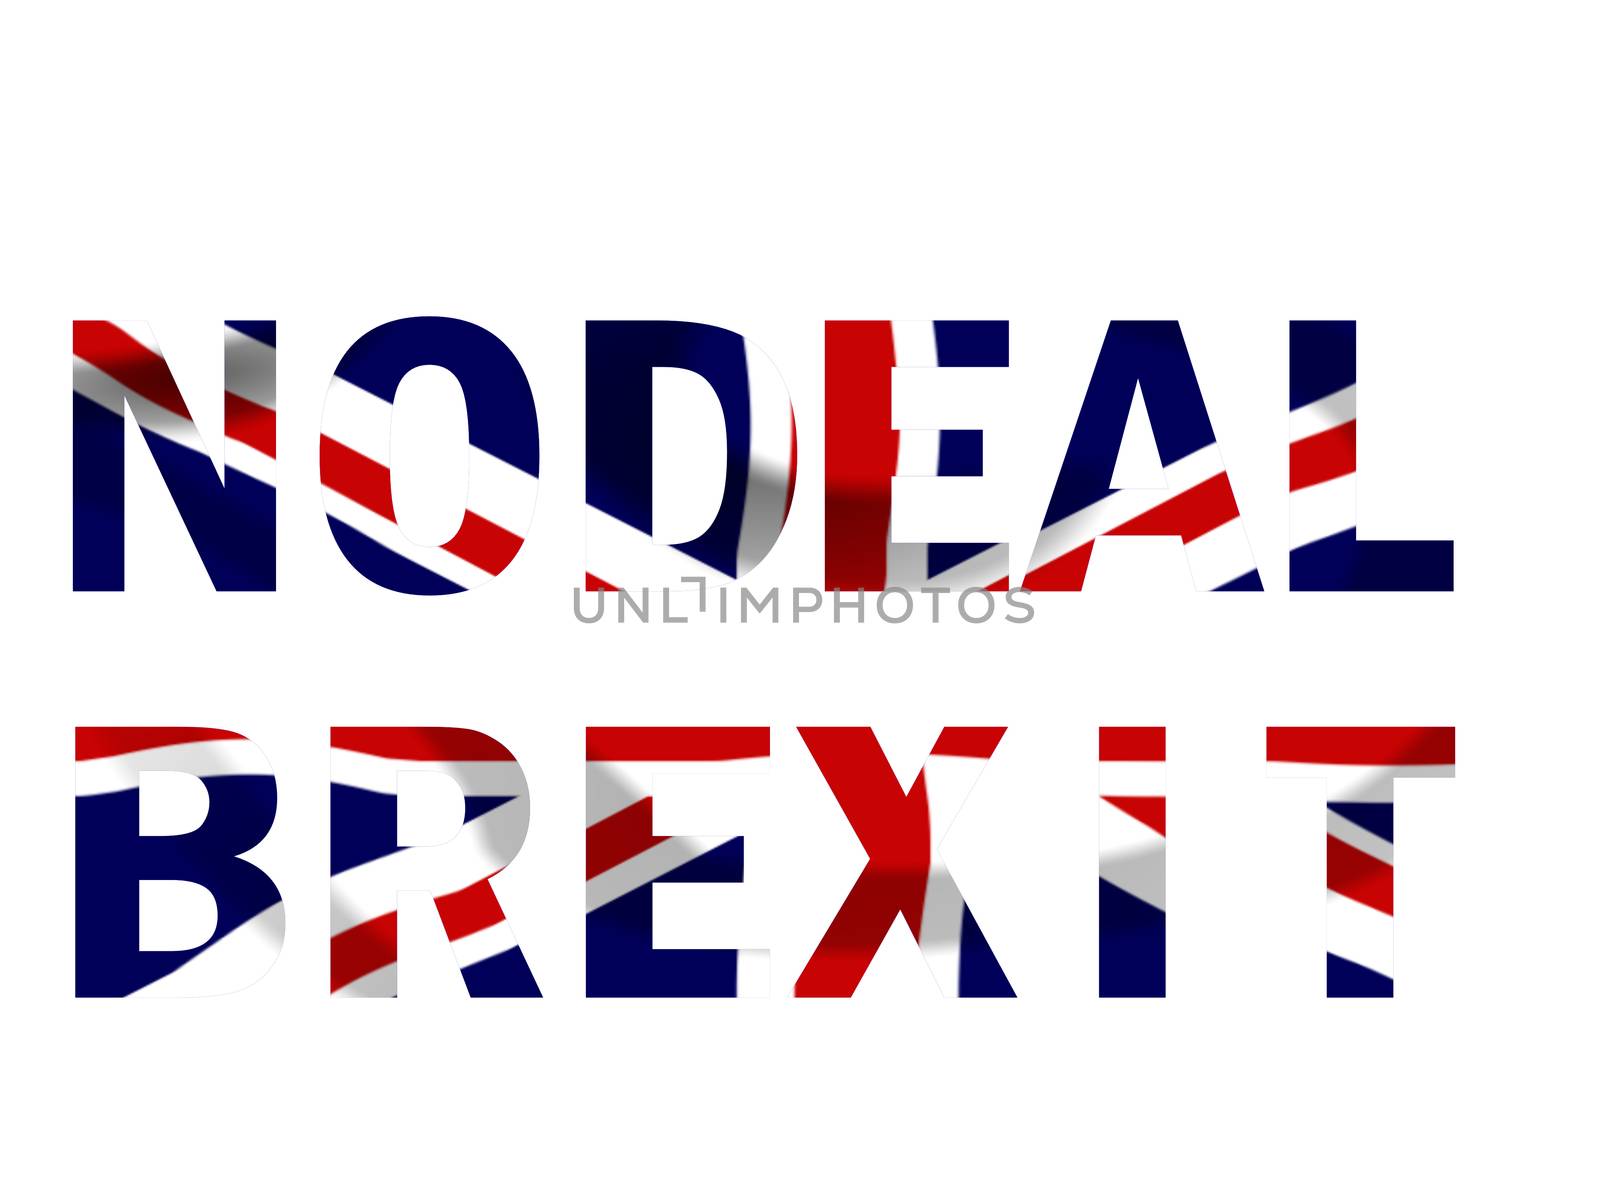 No Deal Brexit text in the colours of the Union Jack flag